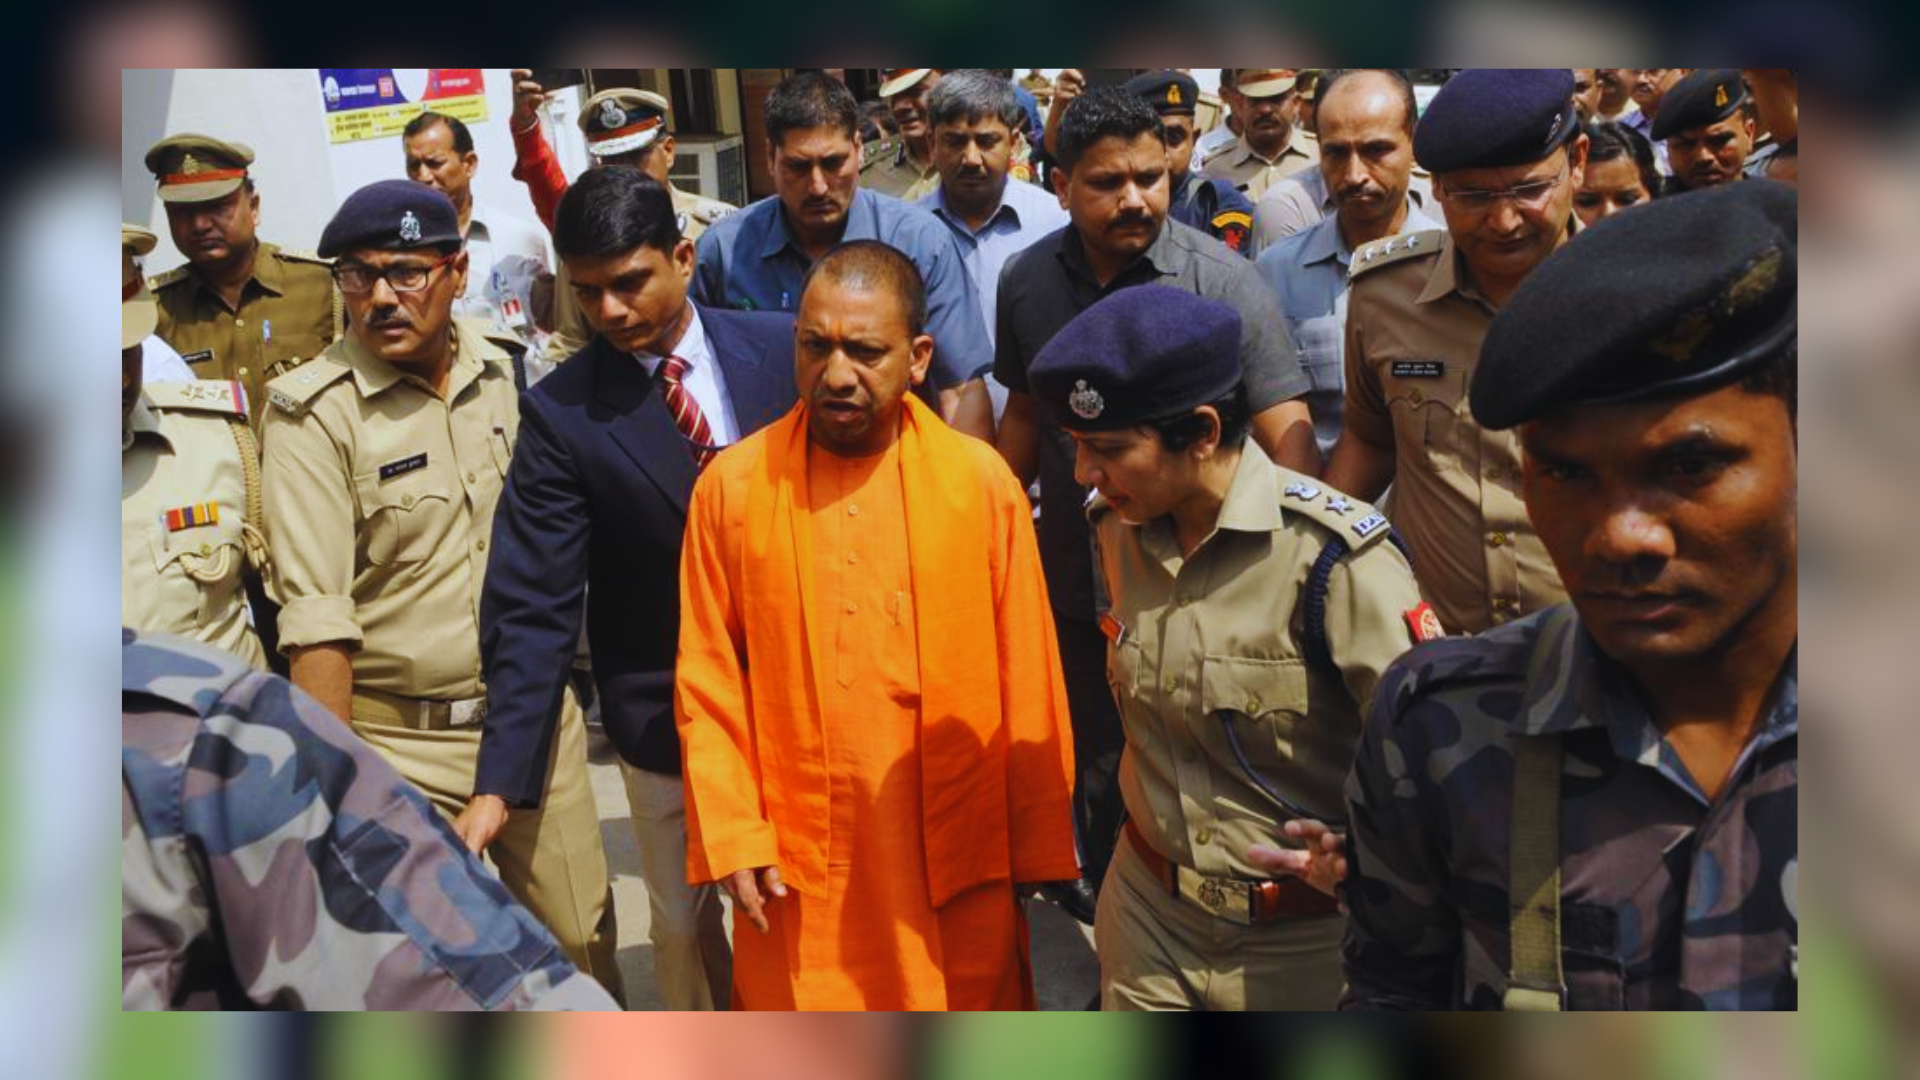 Tragic Stampede In Hathras: FIR Filed, CM Yogi Adityanath Visits Victims, ₹2 Lakh Compensation Announced For Families Affected